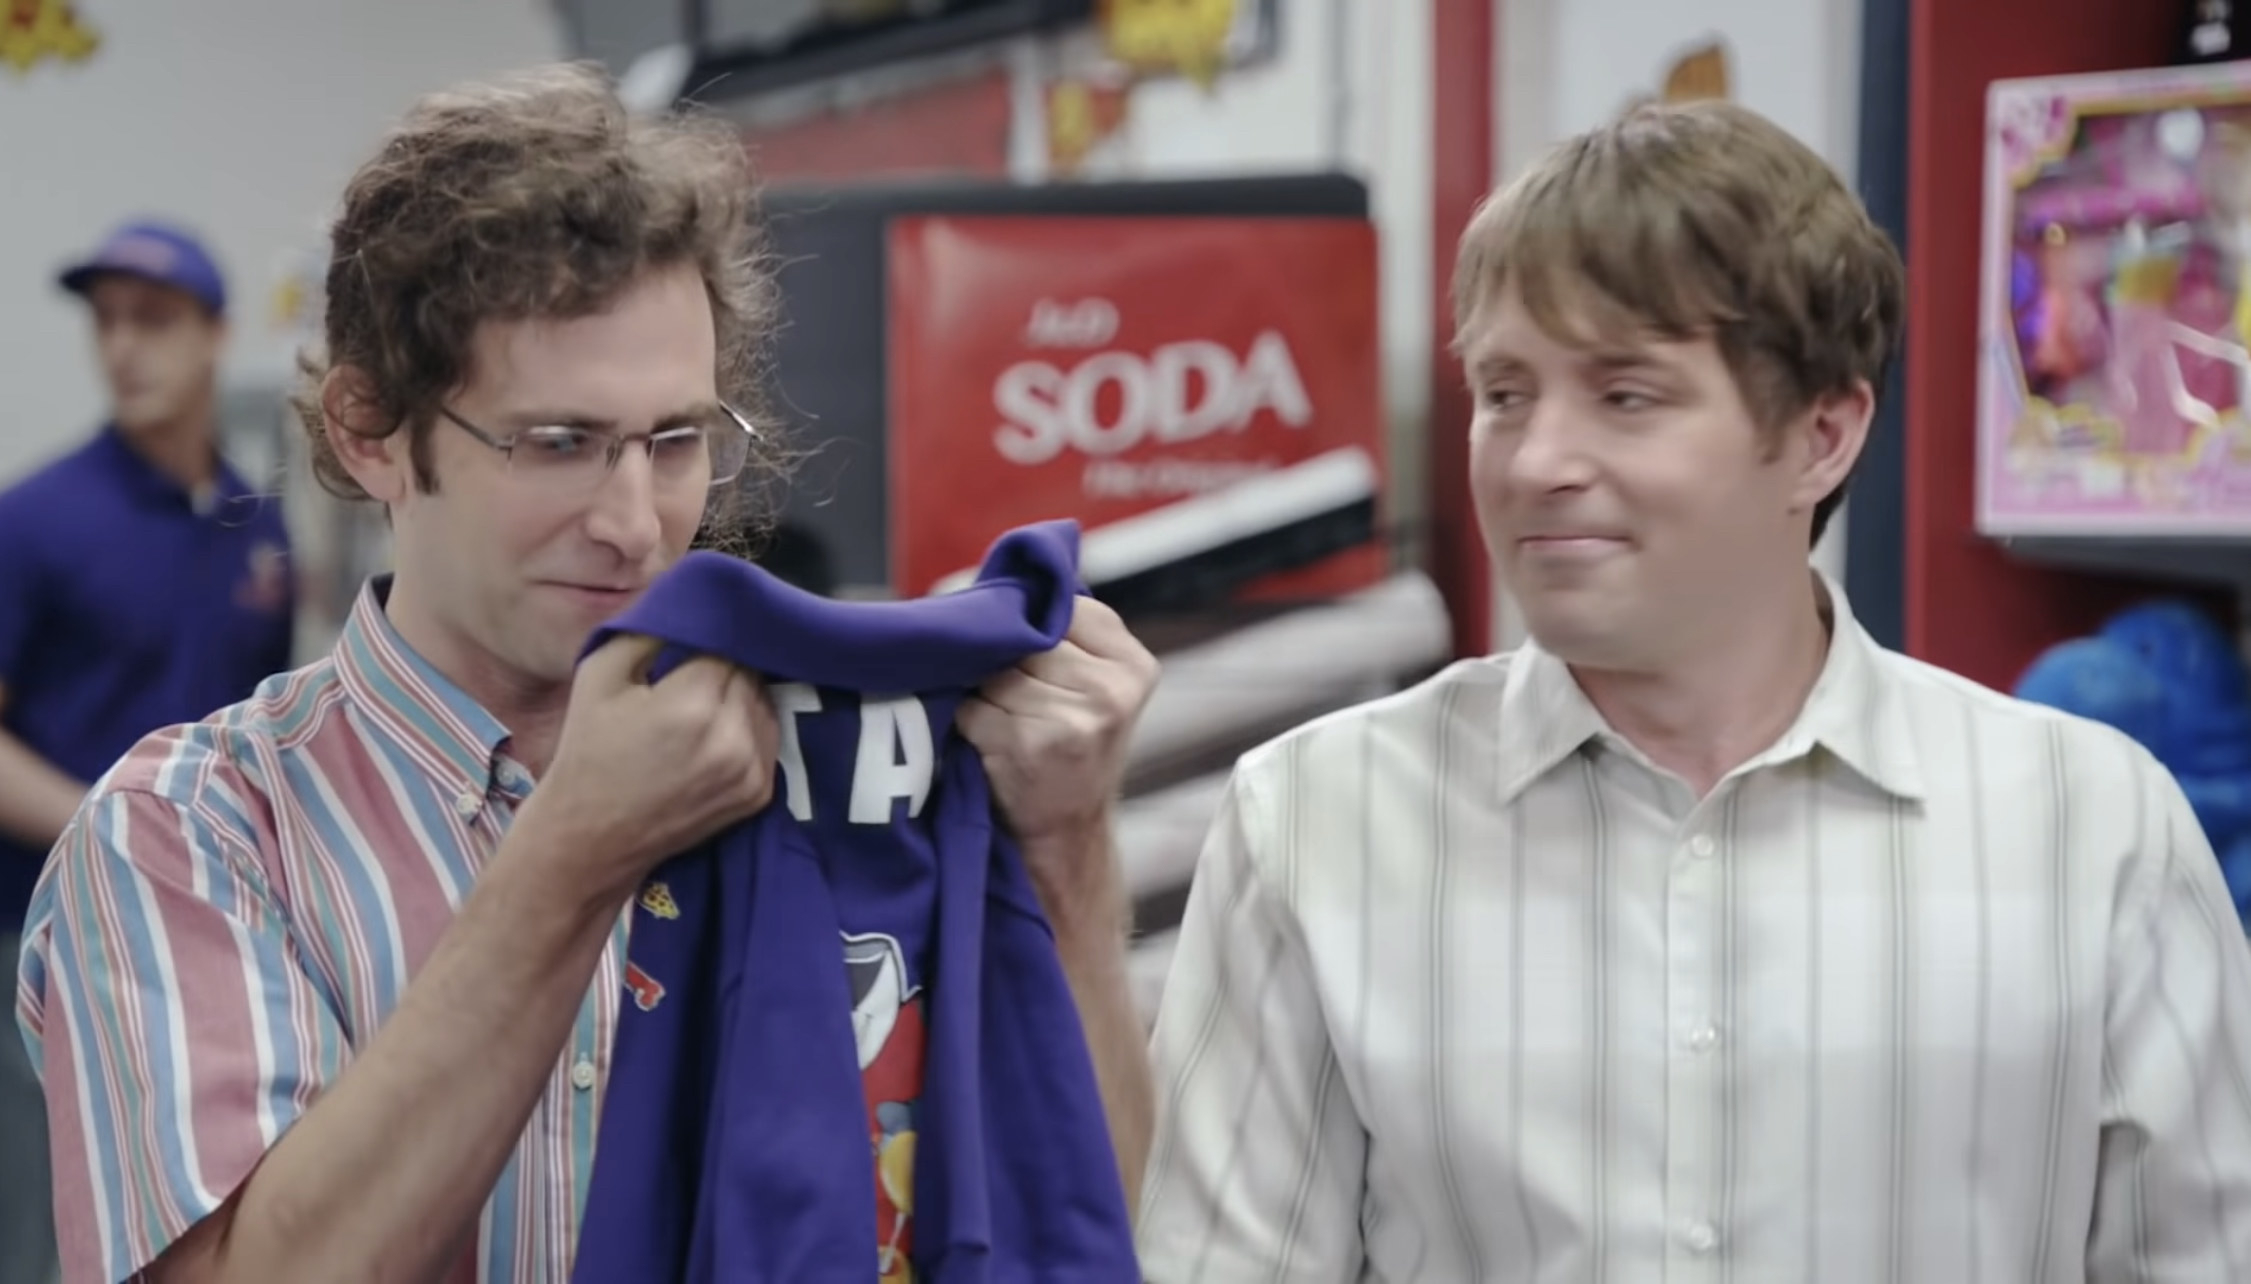 Kyle Mooney holds a Pogie Pepperoni&#x27;s shirt, staring at it awe